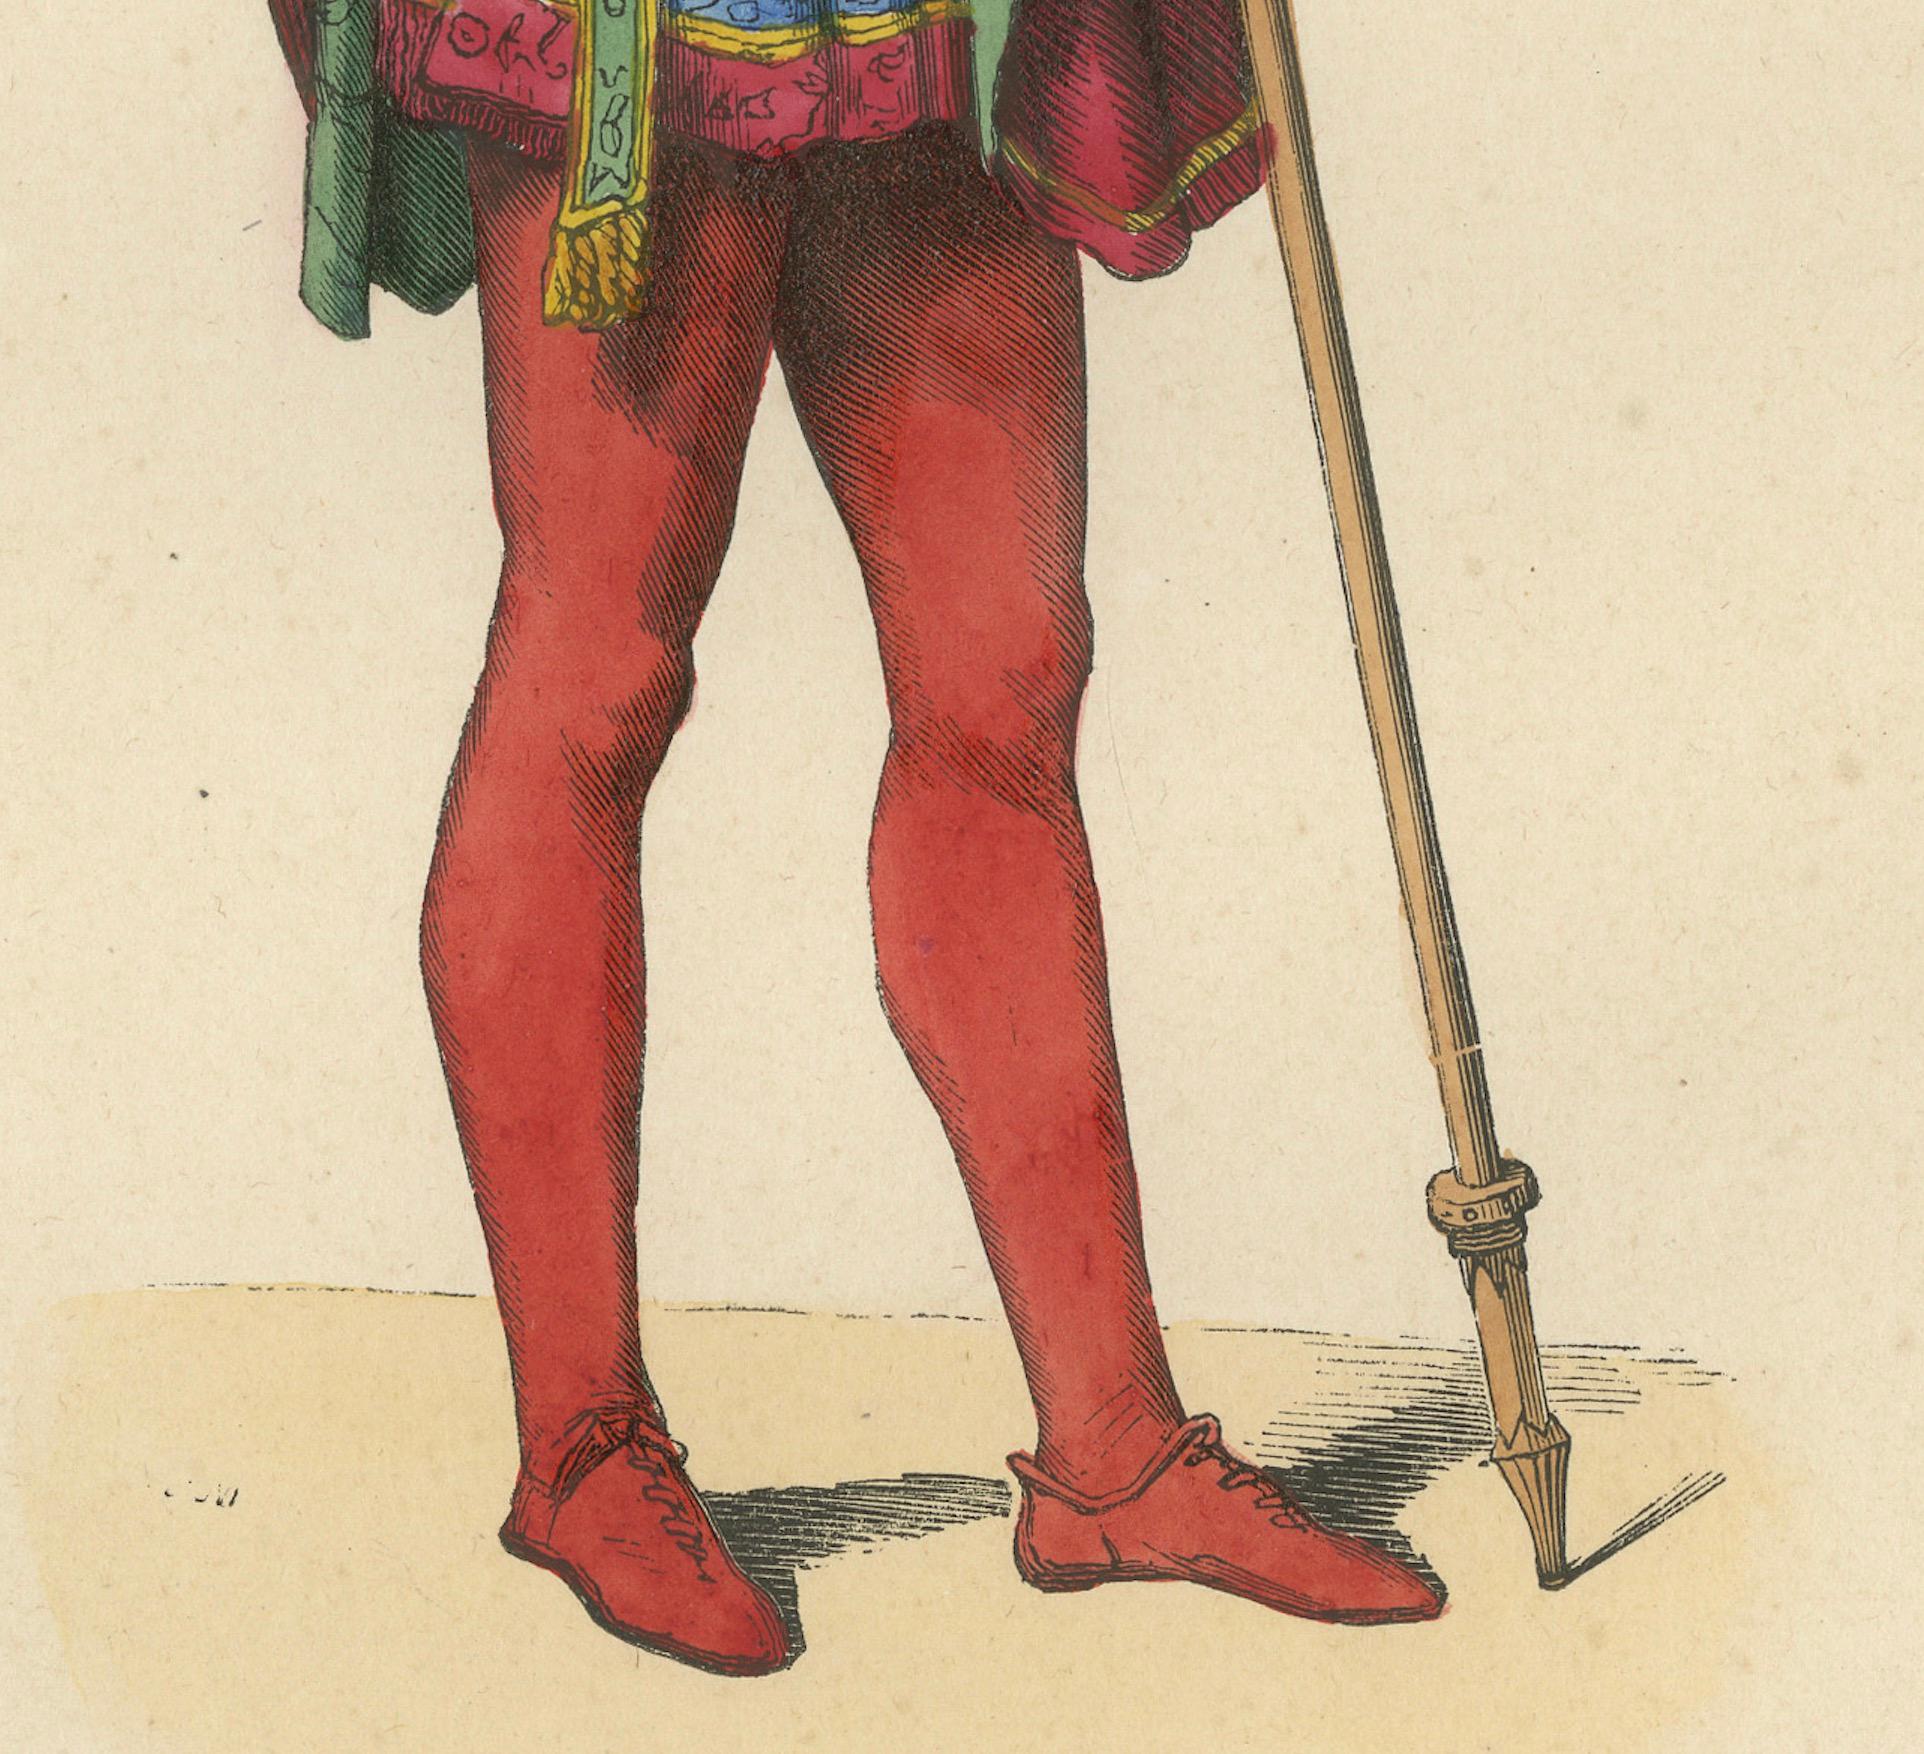 This original antique print depicts a young Venetian man, as indicated by the caption 